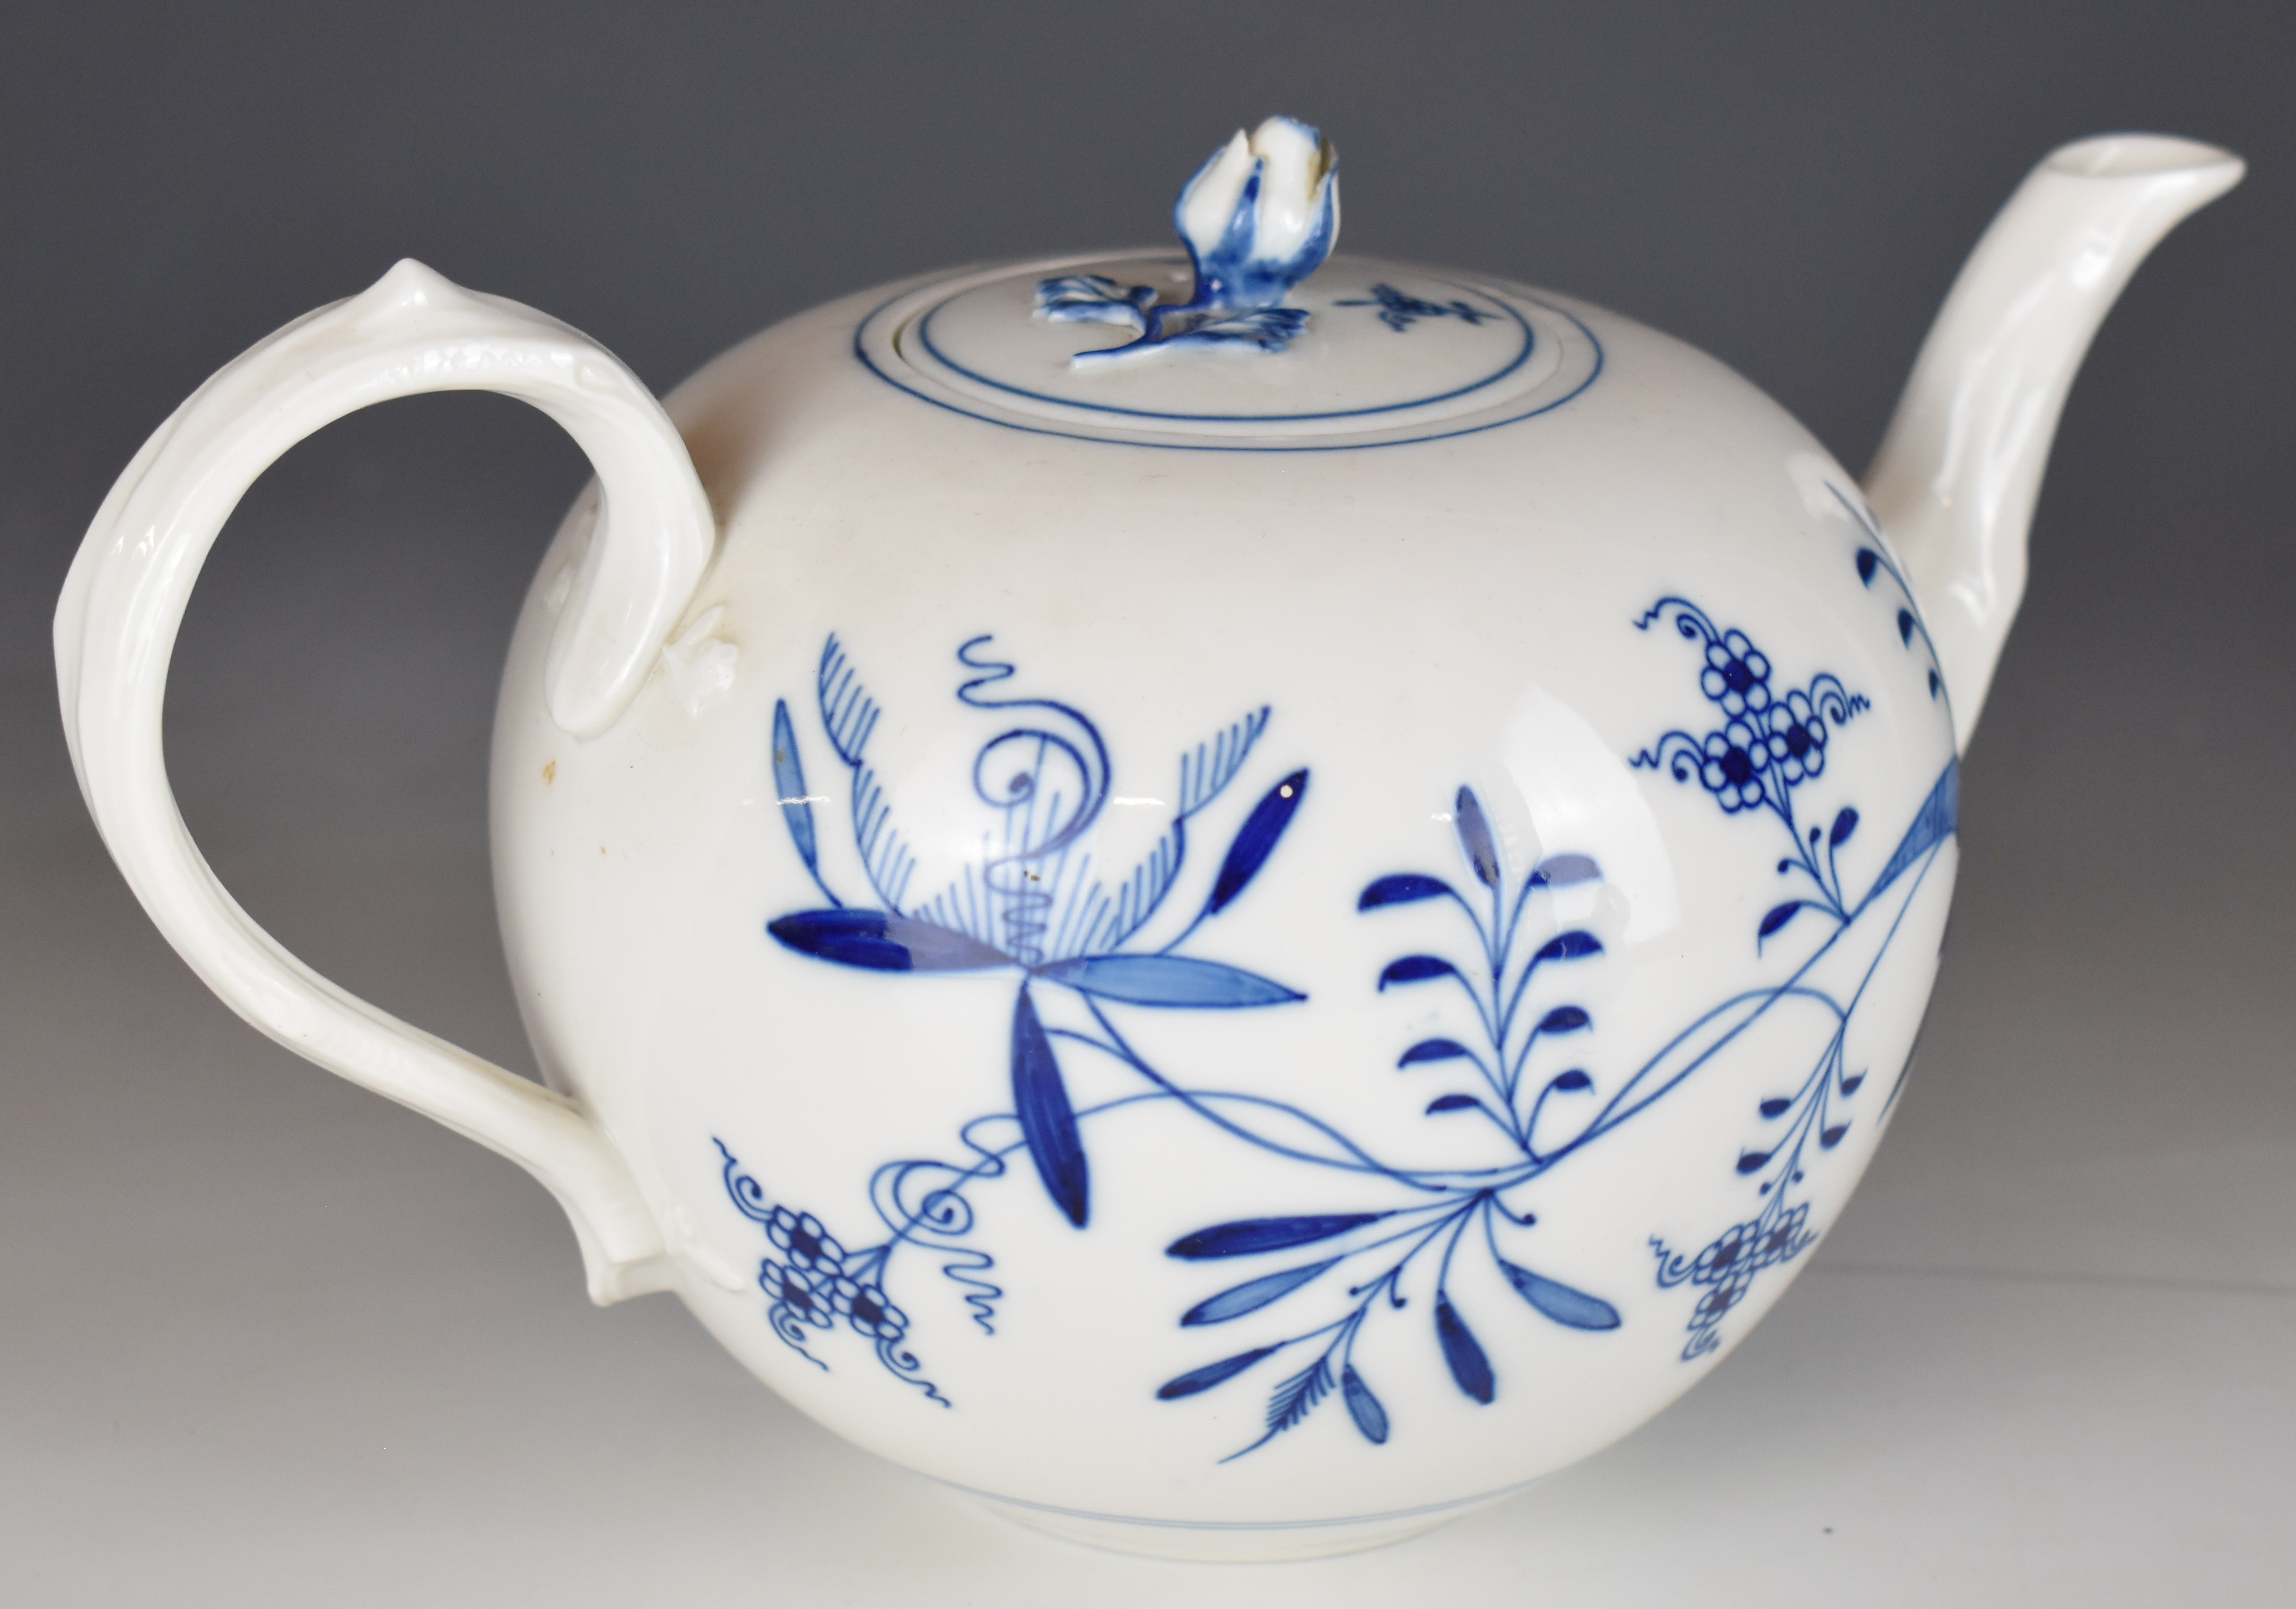 Meissen blue and white porcelain teapot, cream jug and covered sucrier, tallest 20cm - Image 8 of 12